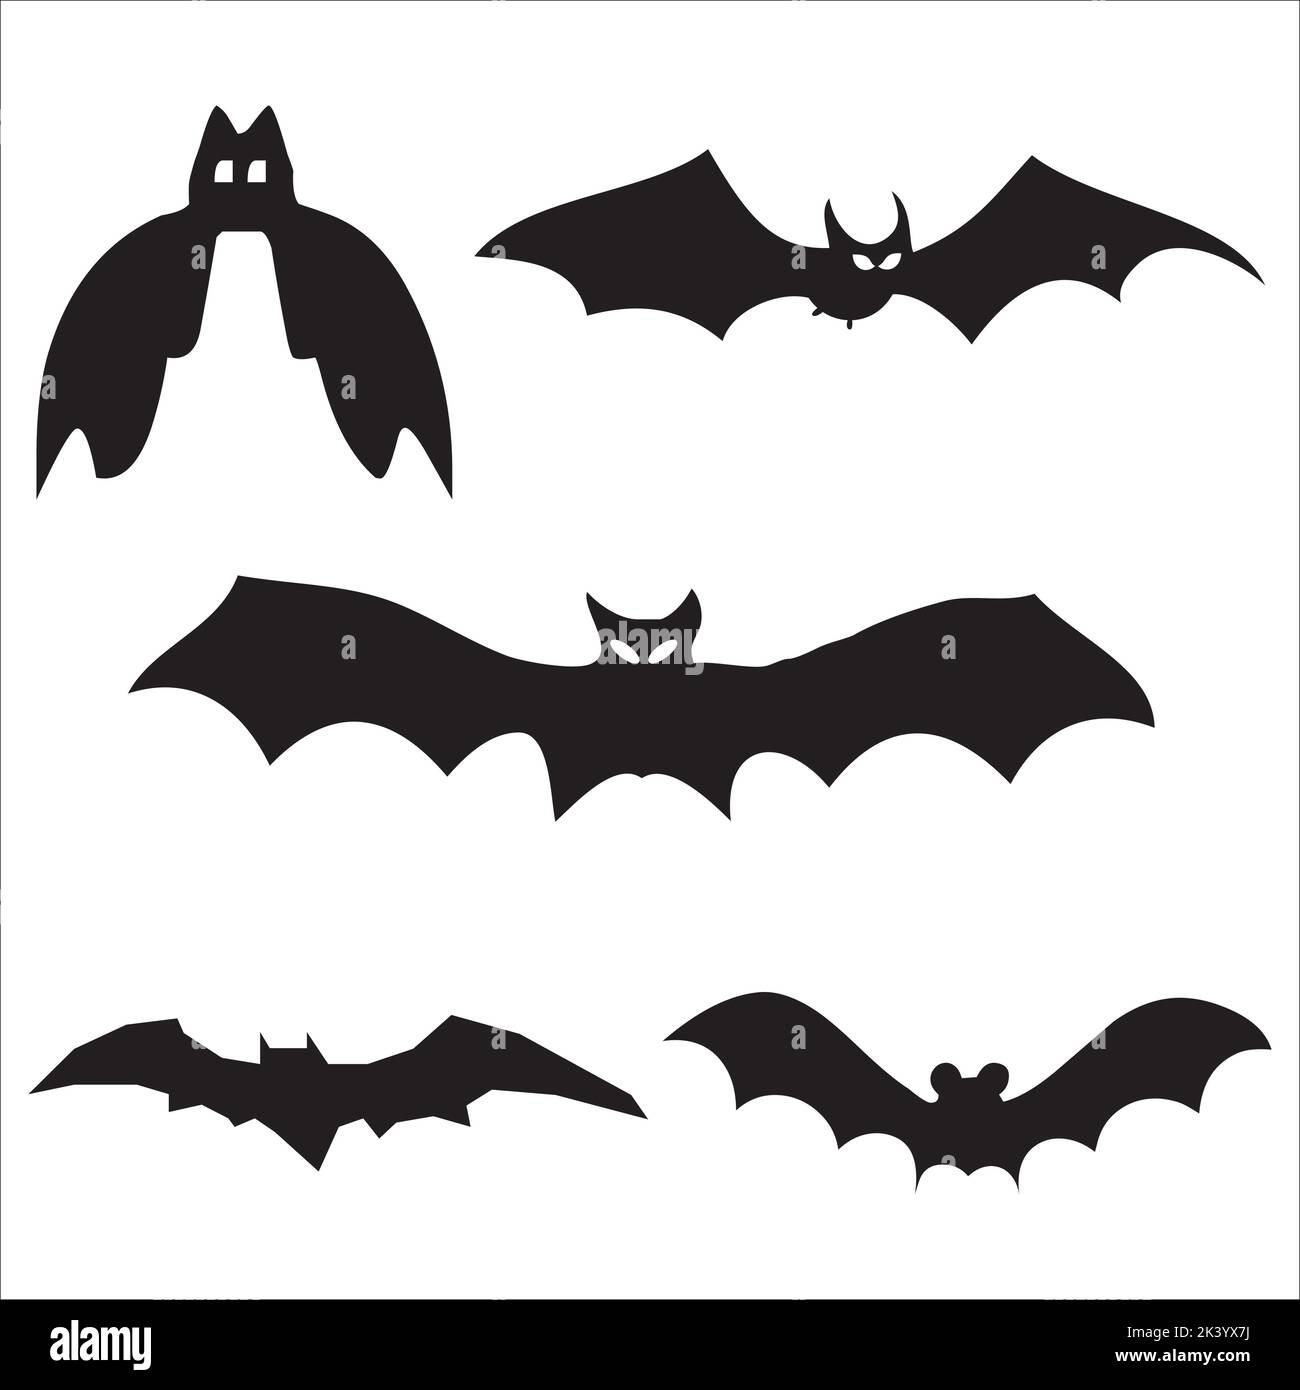 Vector Set Of Halloween Bats Silhouettes Illustration Isolated On White Background Stock Vector